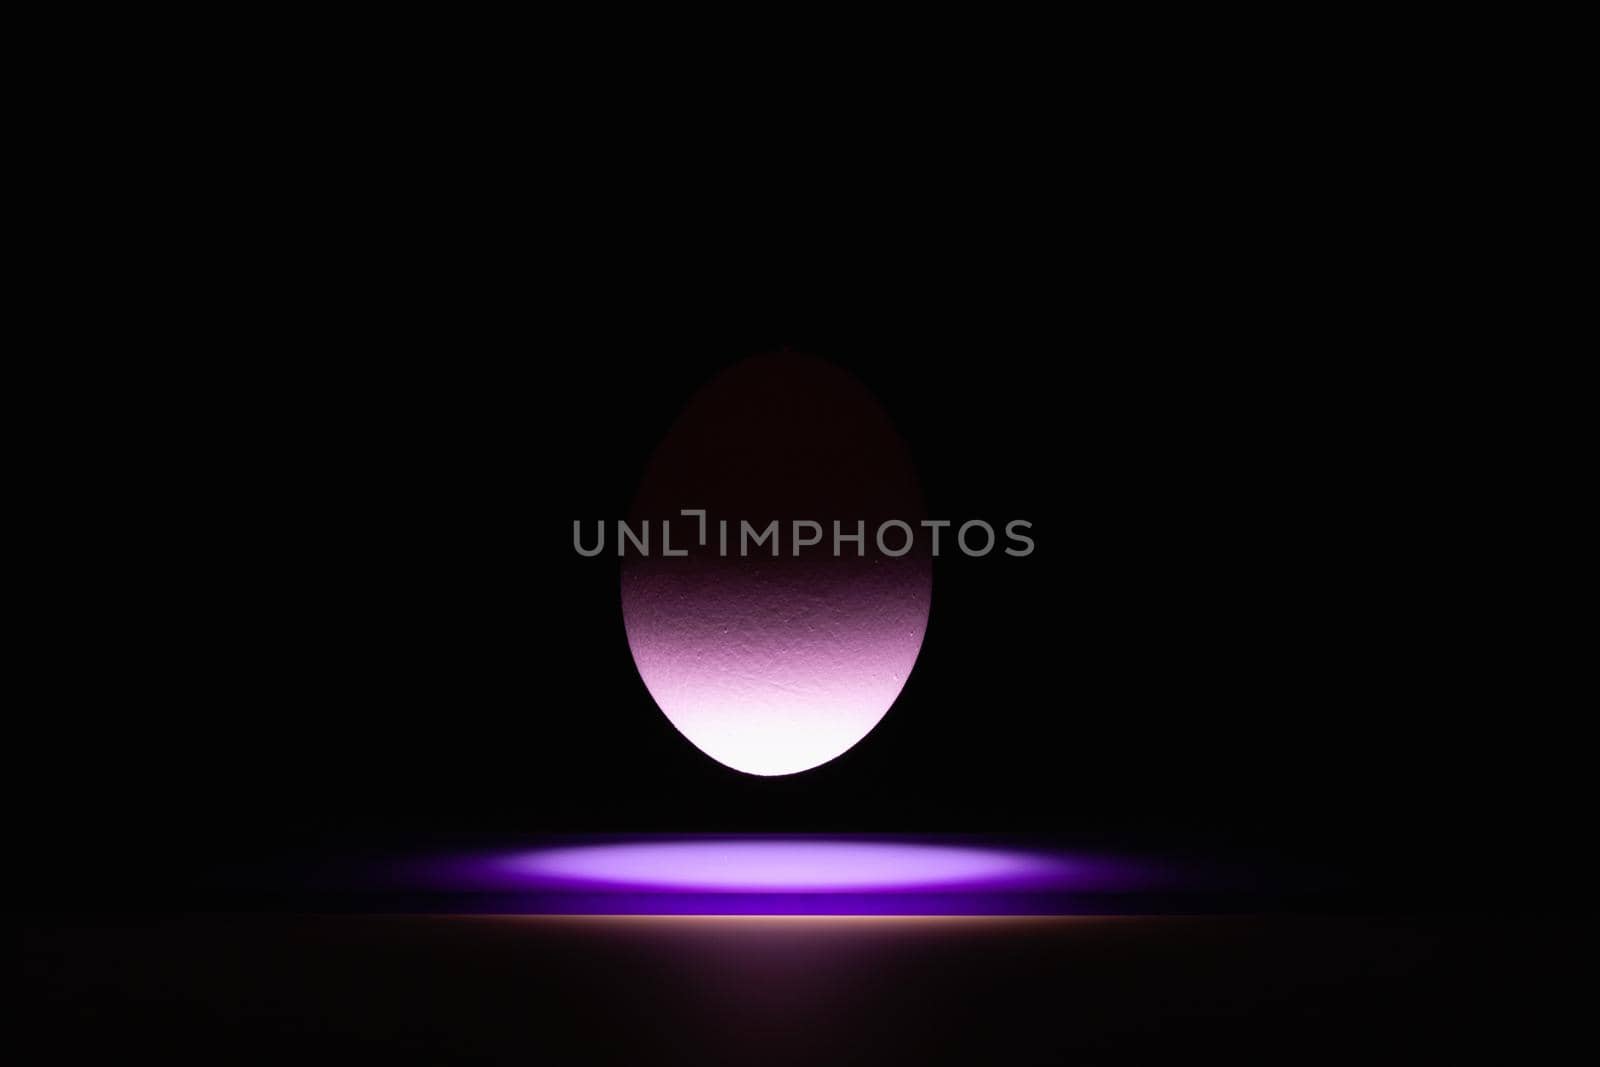 Purple egg levitating over a black glass table in the dark room.